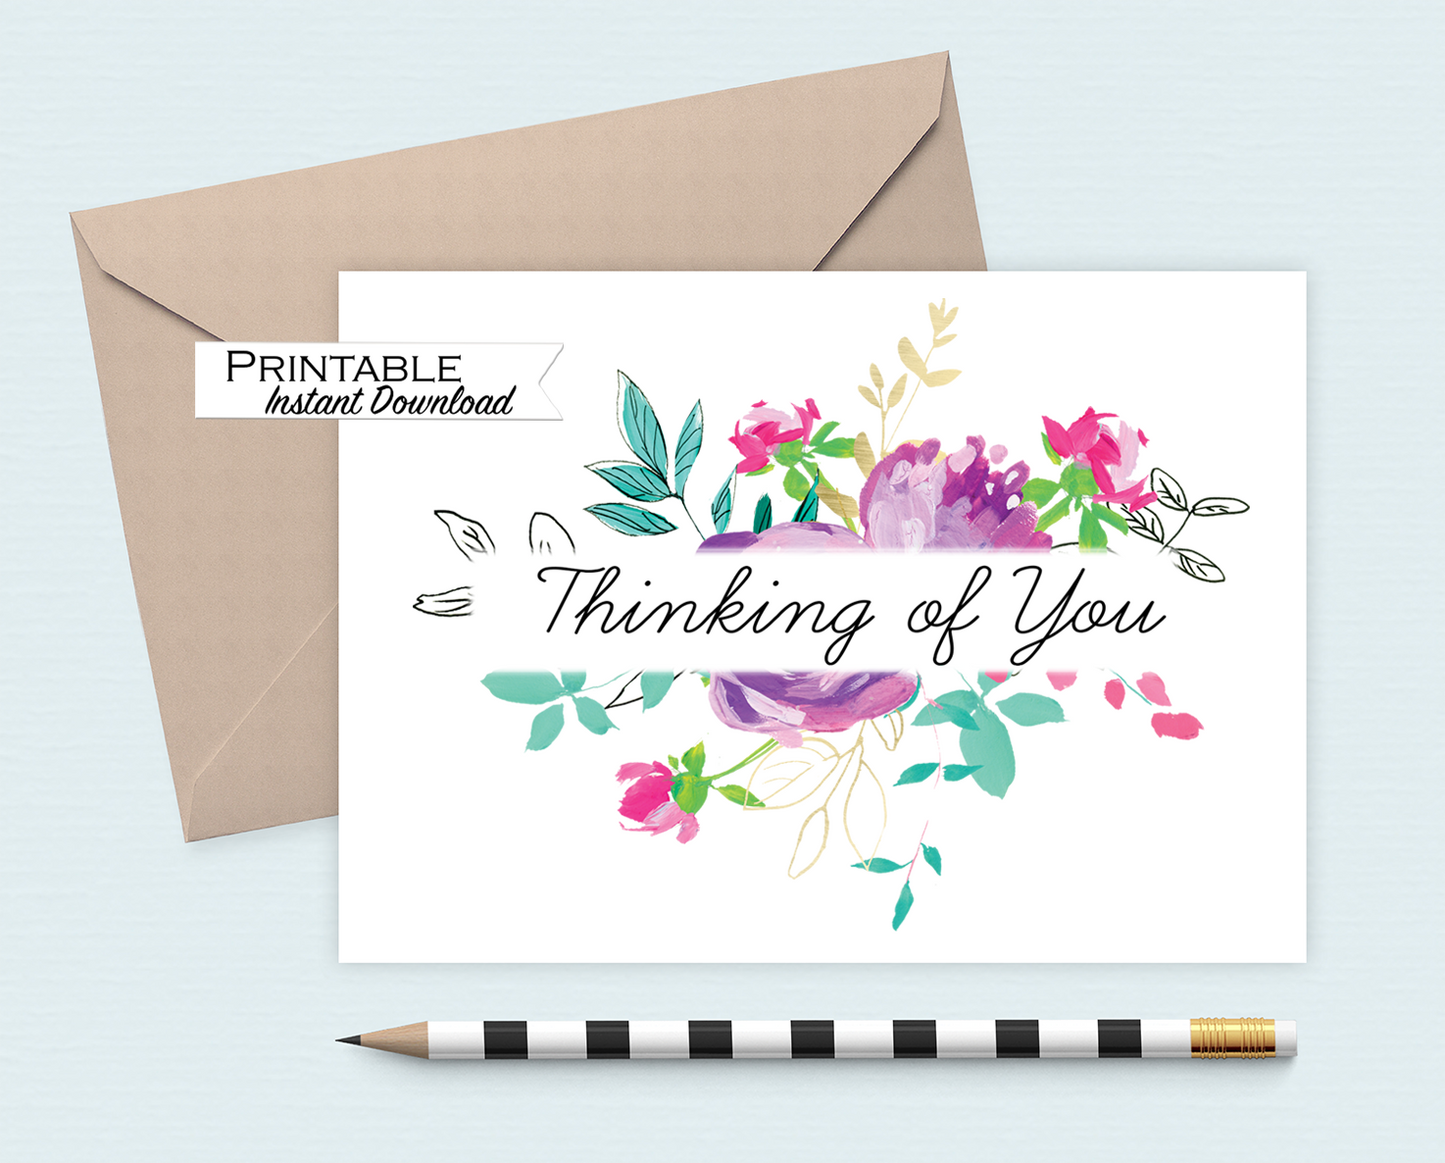 Thinking of you Card, Sympathy Card, Condolence Card, Bright Floral Card, Empathy Card, Sorry for your Loss, Instant Download Printable Card